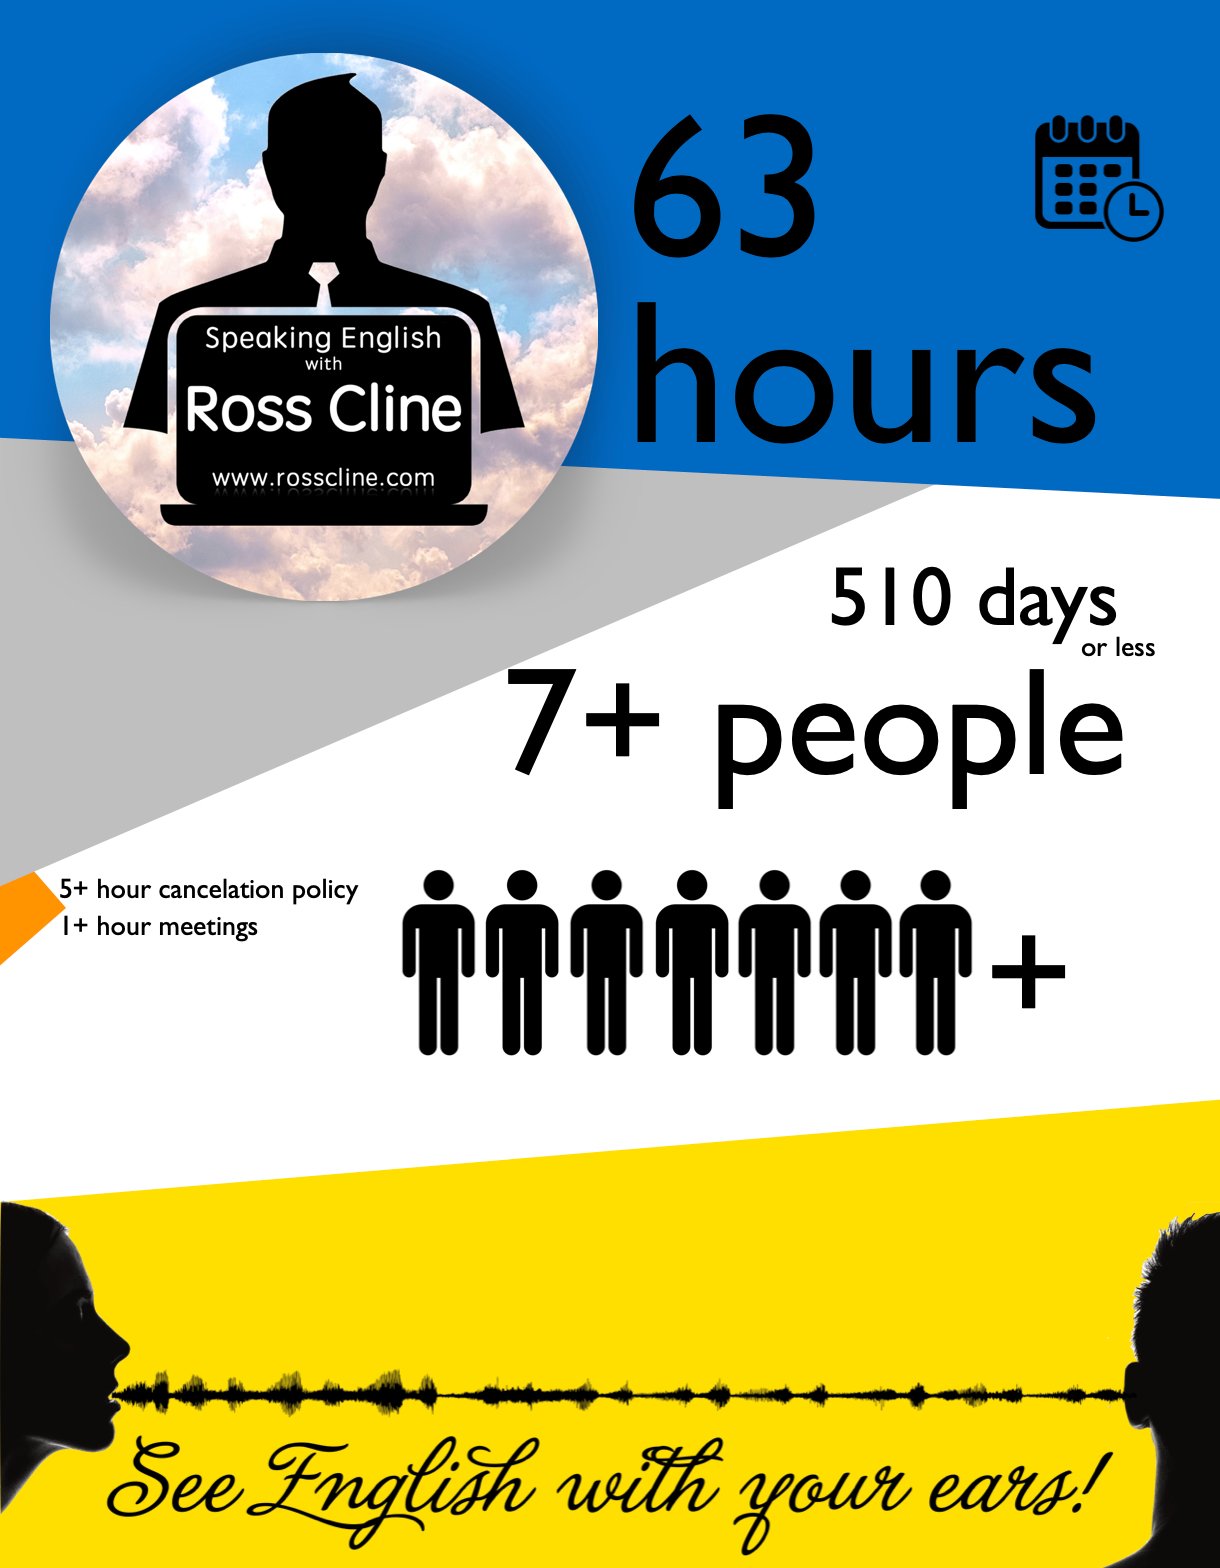 B.) 63 hours of Online Time for 7+ people - www.rosscline.com